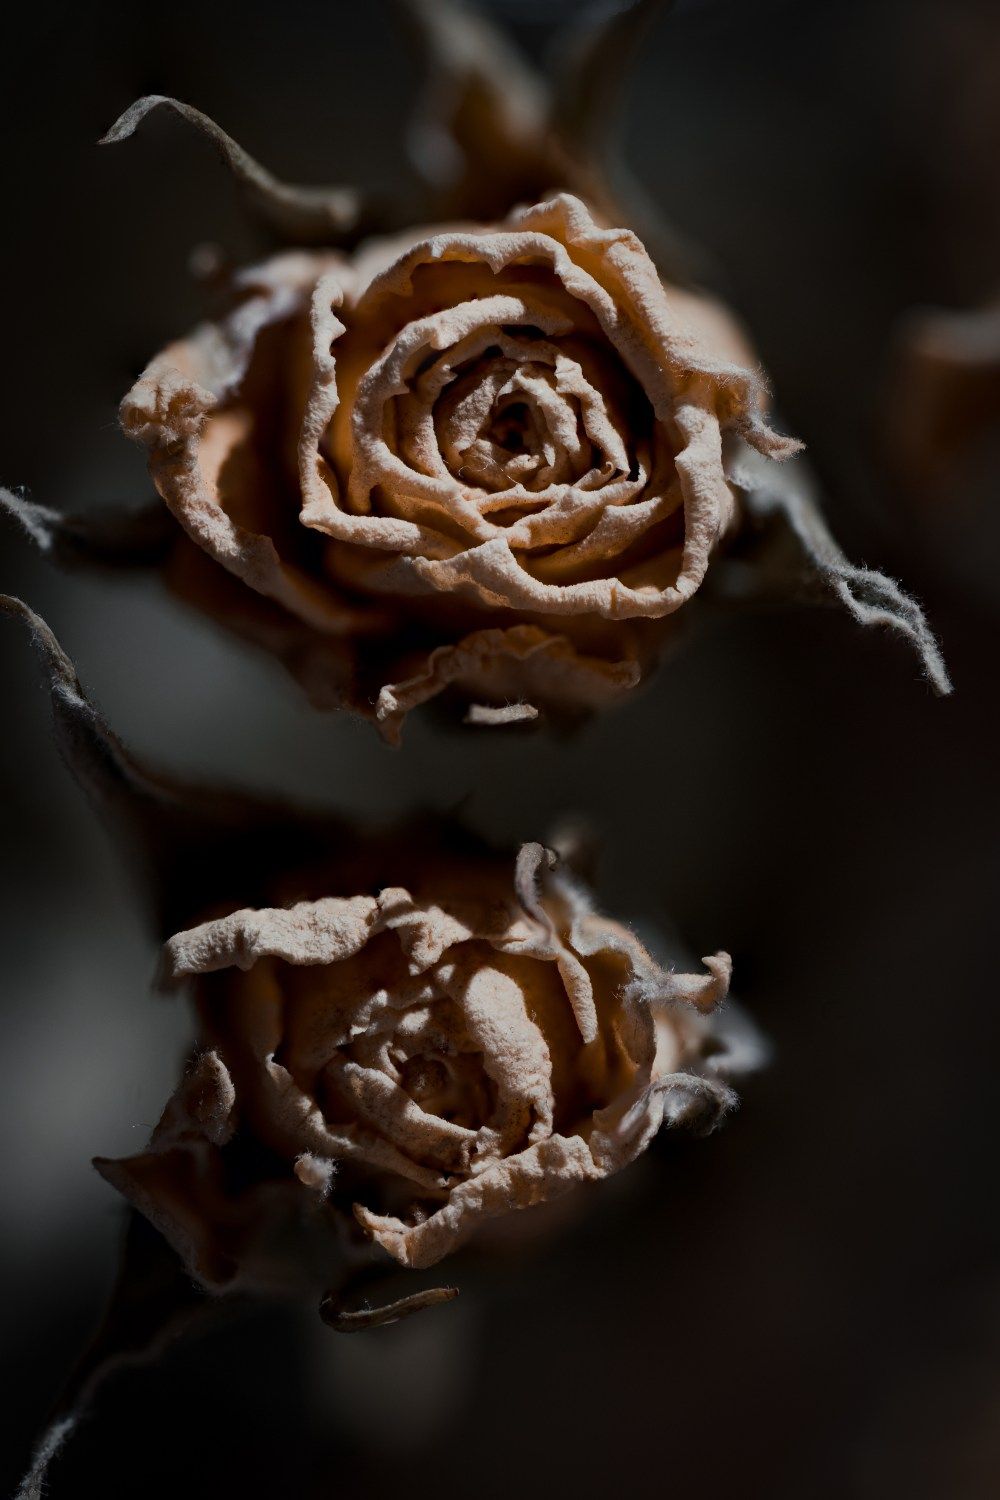 The Best 14 Photography Dead Flowers Image